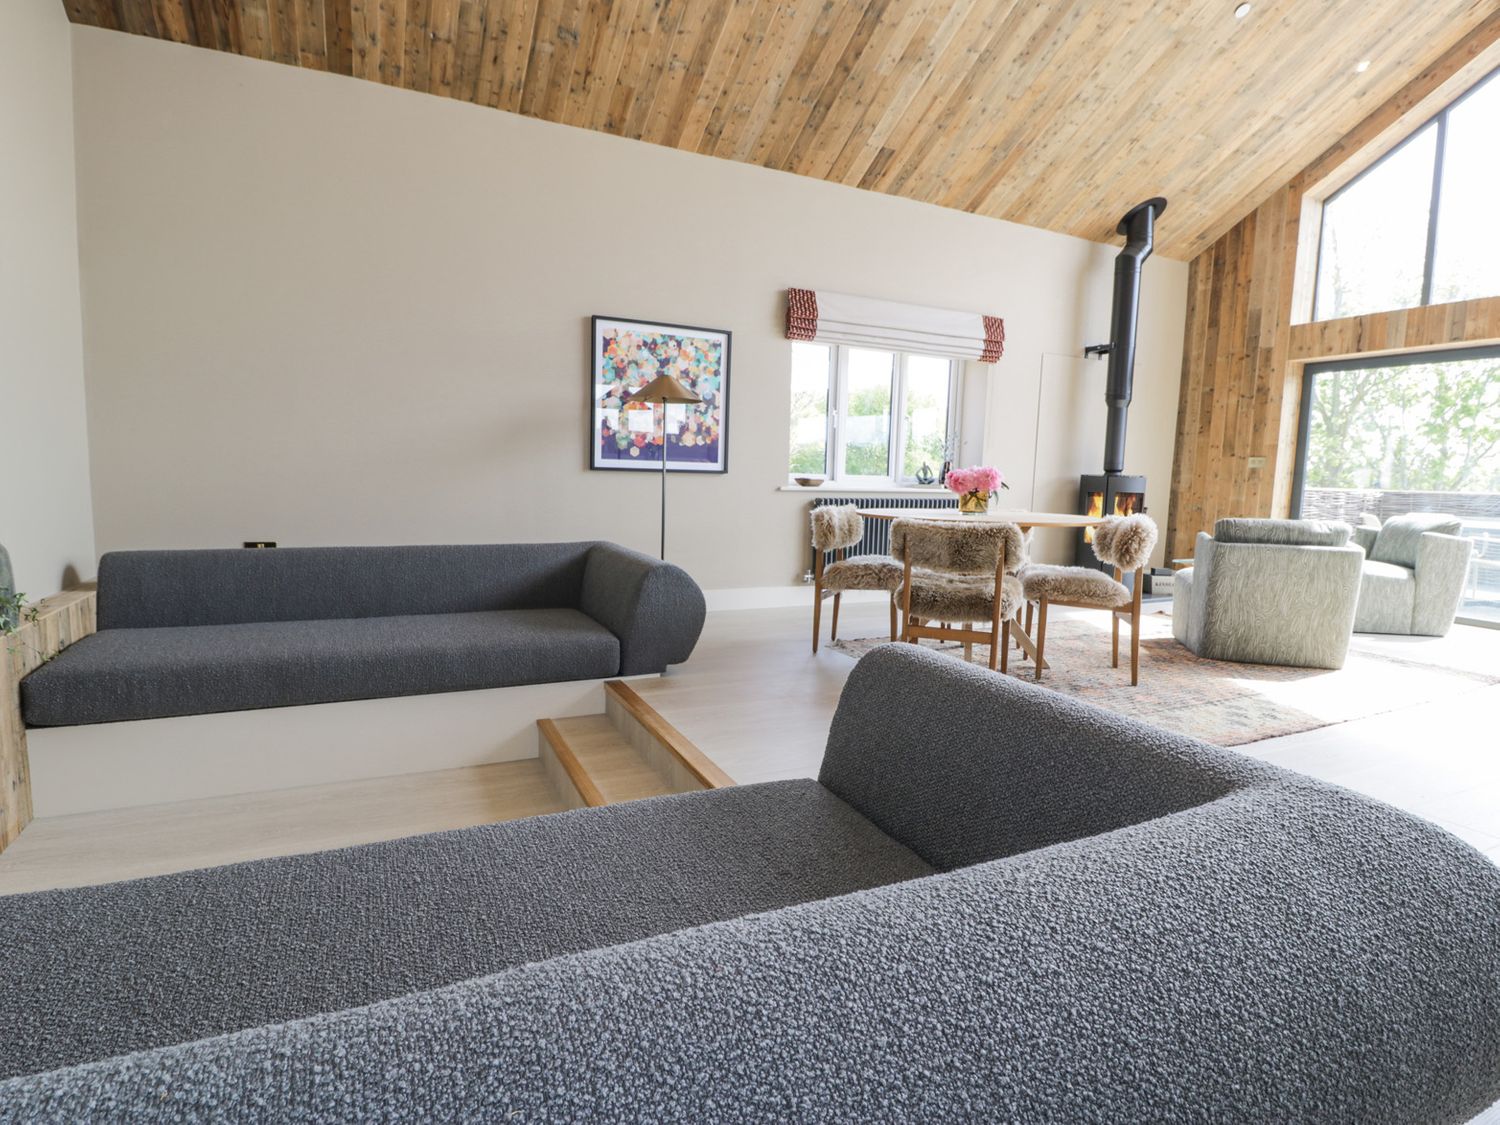 The Barn is in Llanfechell, Anglesey, North Wales, Near Snowdonia National Park, 1 bed, stylish home